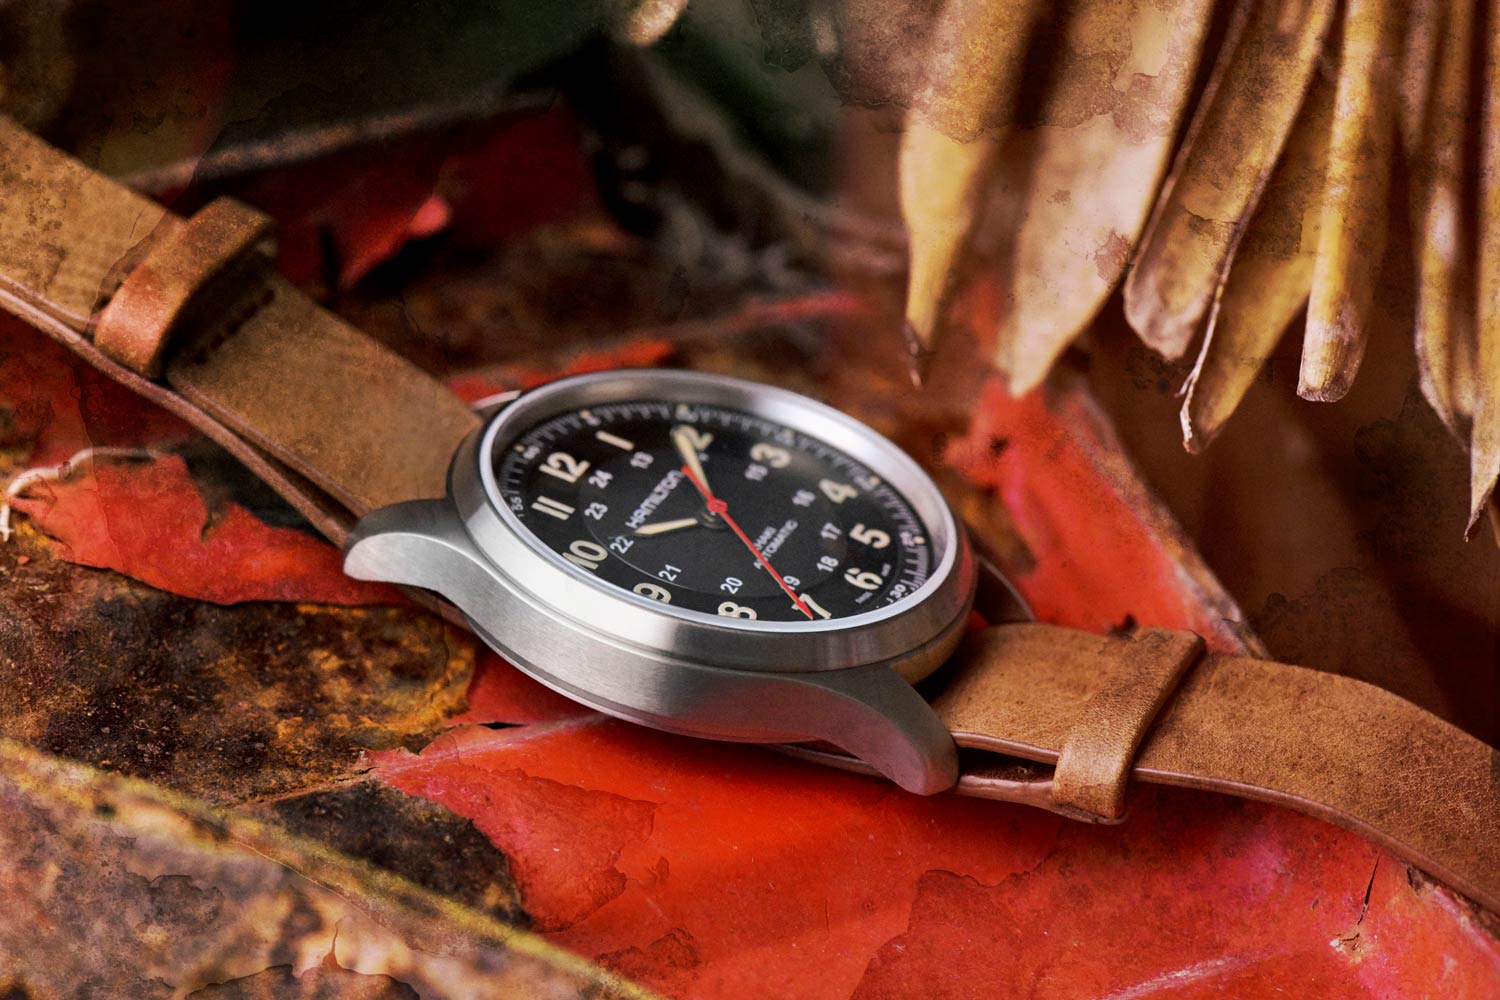 The 42mm Hamilton Field Watch features a brushed titanium case, black vinyl dial with a matte center and a red seconds hand, intended as a tribute to Yara’s guerilla forces.